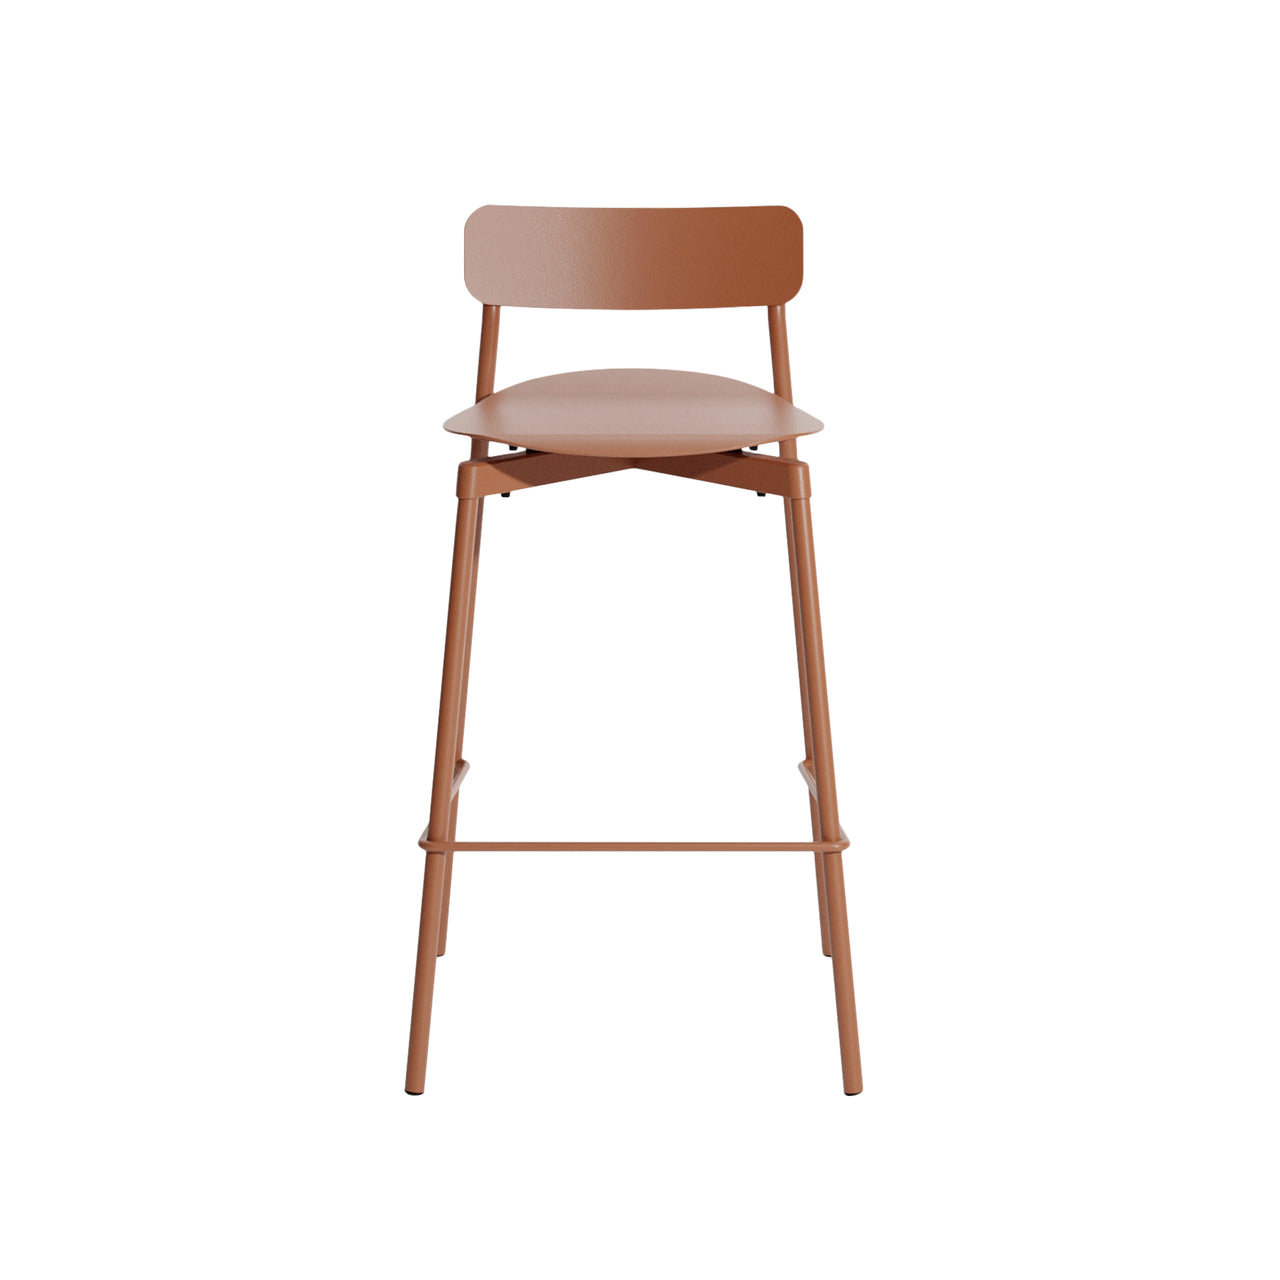 Fromme Stacking Bar + Counter Stool: Counter + Terracotta